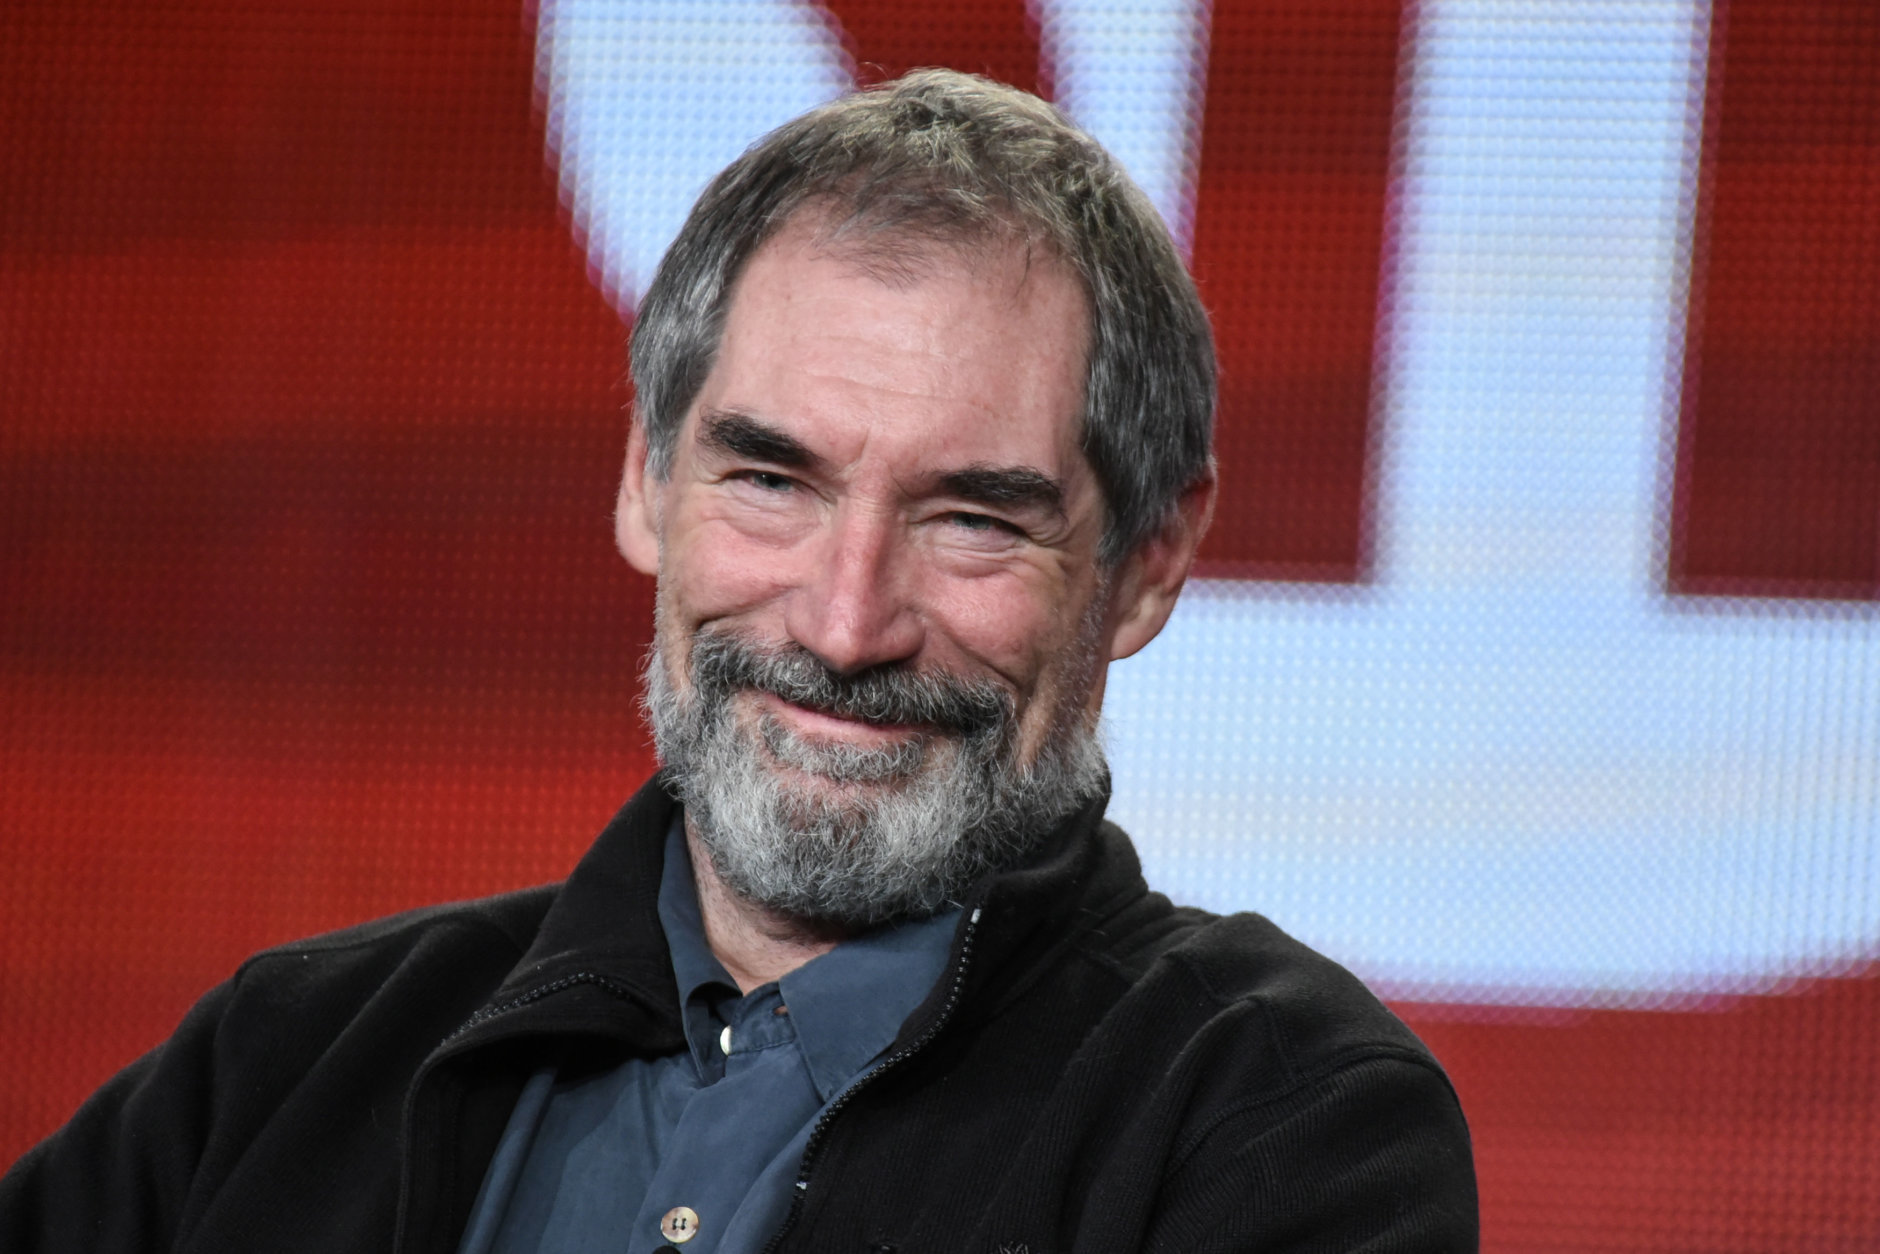 Timothy Dalton participates in the "Penny Dreadful" panel at the CBS/Showtime 2015 Winter TCA on Monday, Jan. 12, 2015, in Pasadena, Calif. (Photo by Richard Shotwell/Invision/AP)